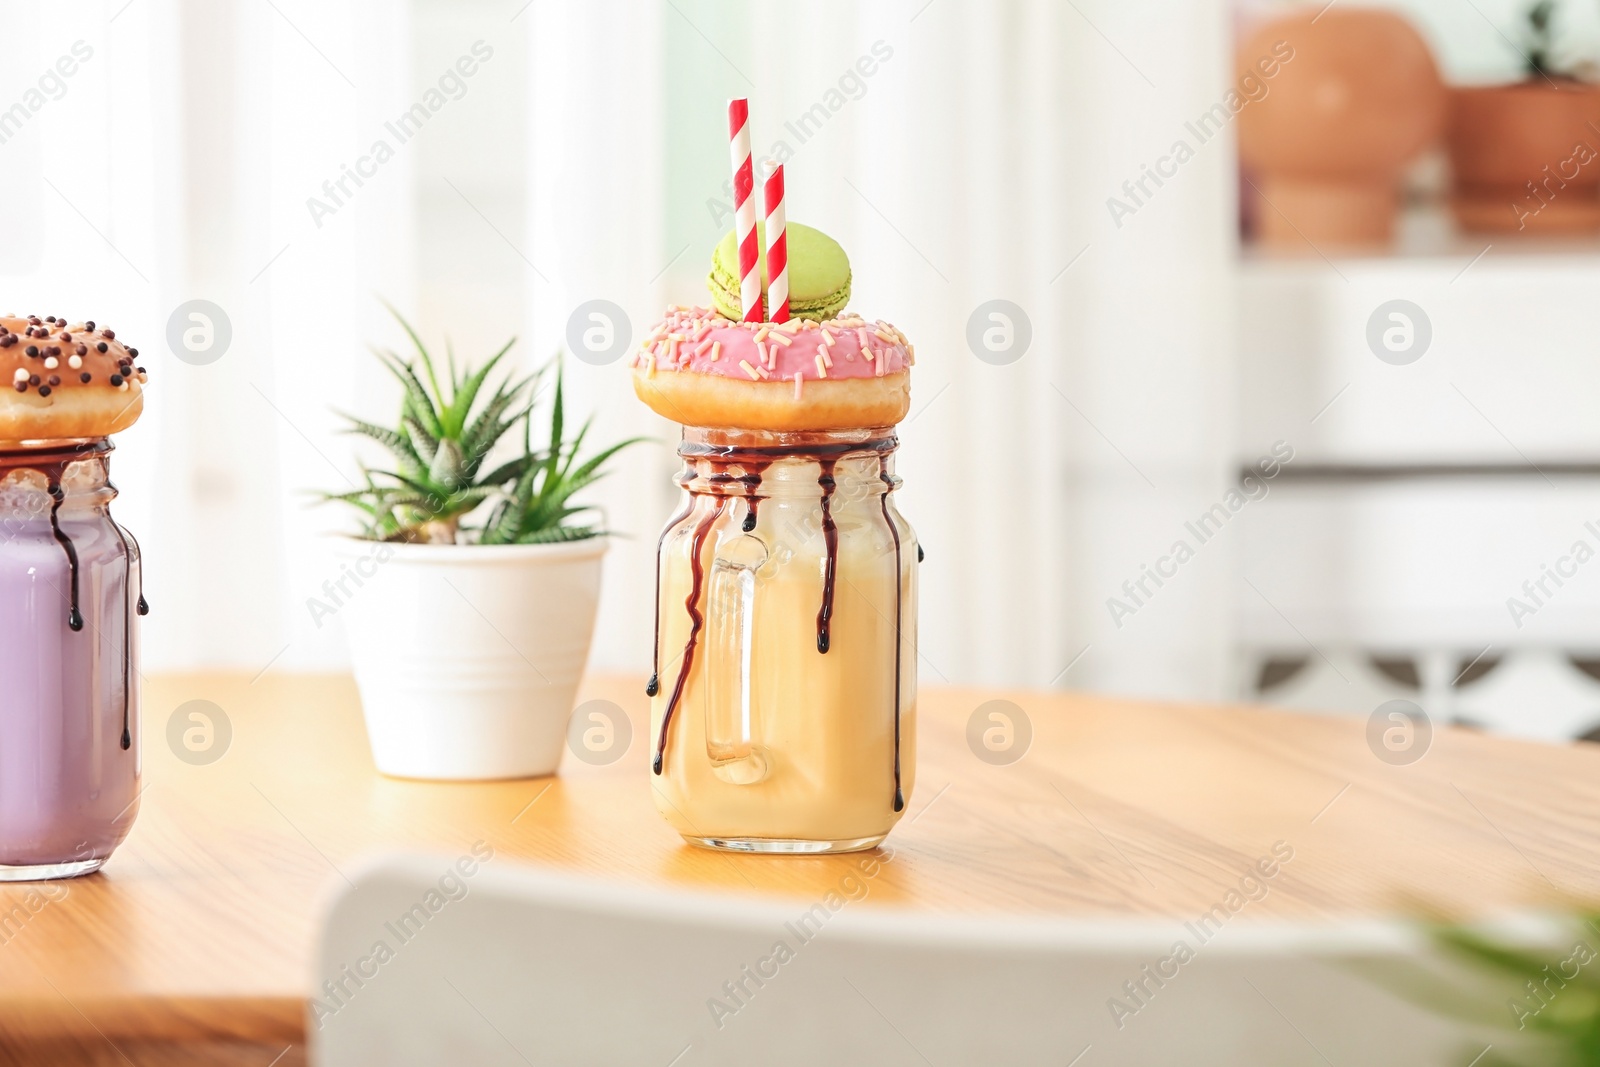 Photo of Mason jar with delicious milk shake on table against blurred background